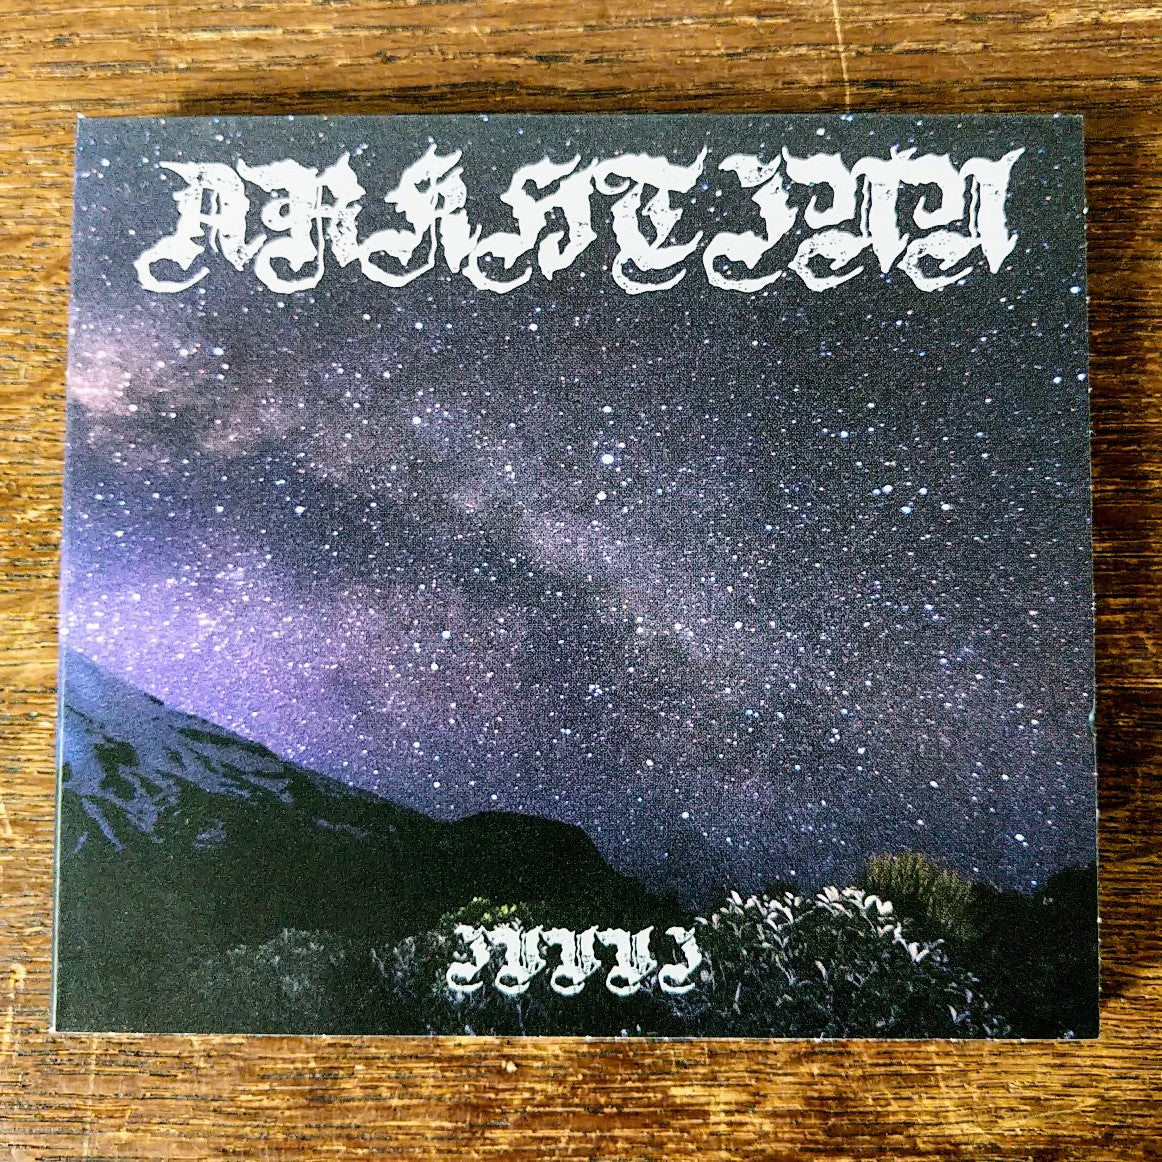 [SOLD OUT] ARKHTINN "IVVVII" 2xCD